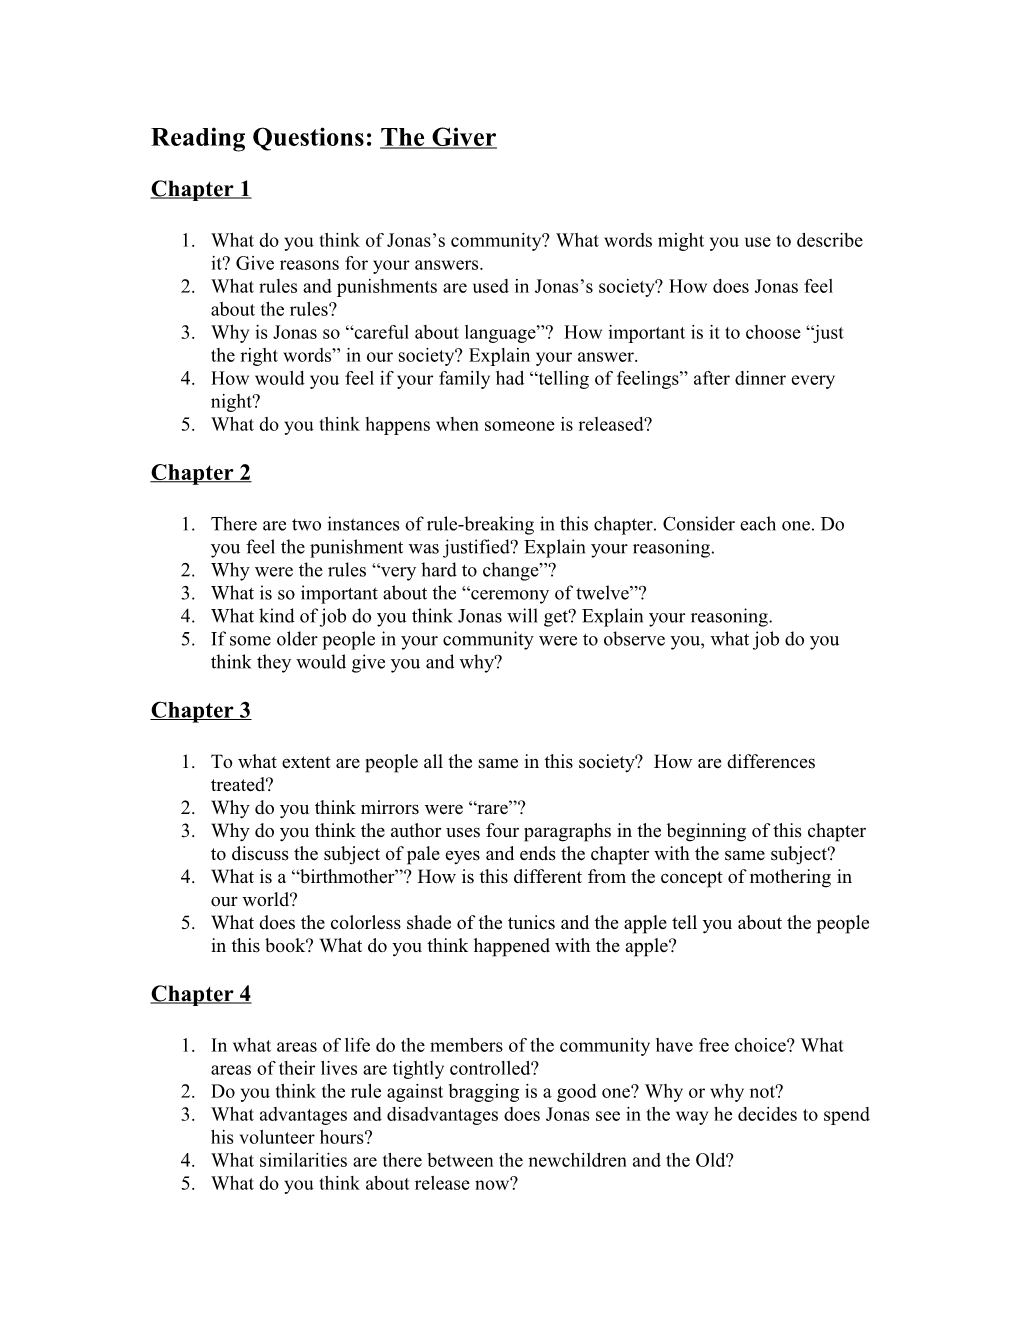 The Giver: Possible Journal and Discussion Topics s1